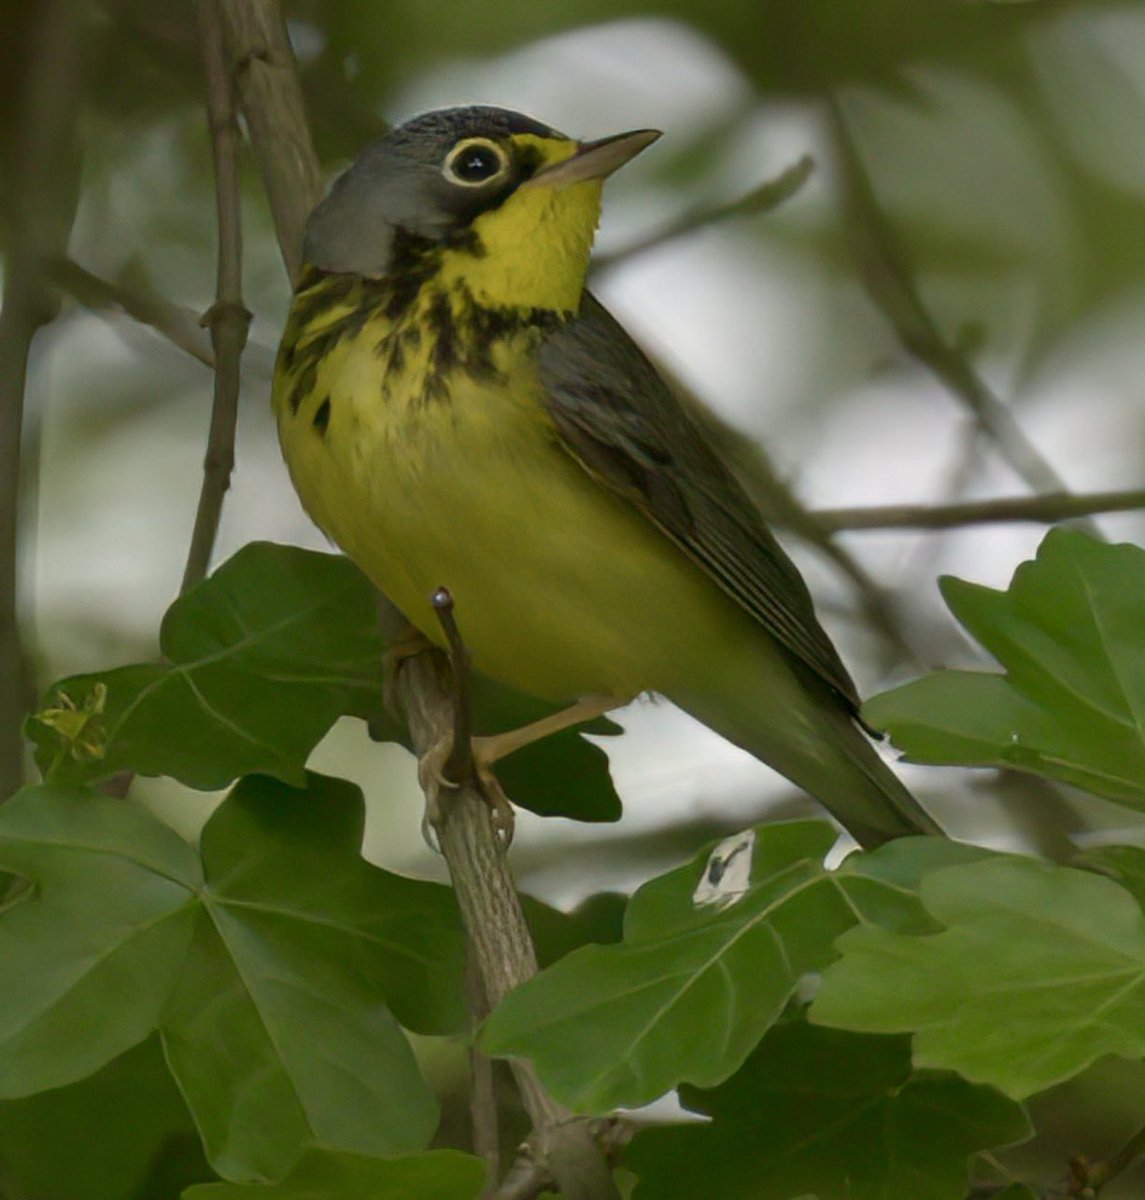 Canada warbler in the vale @prospect_park this afternoon